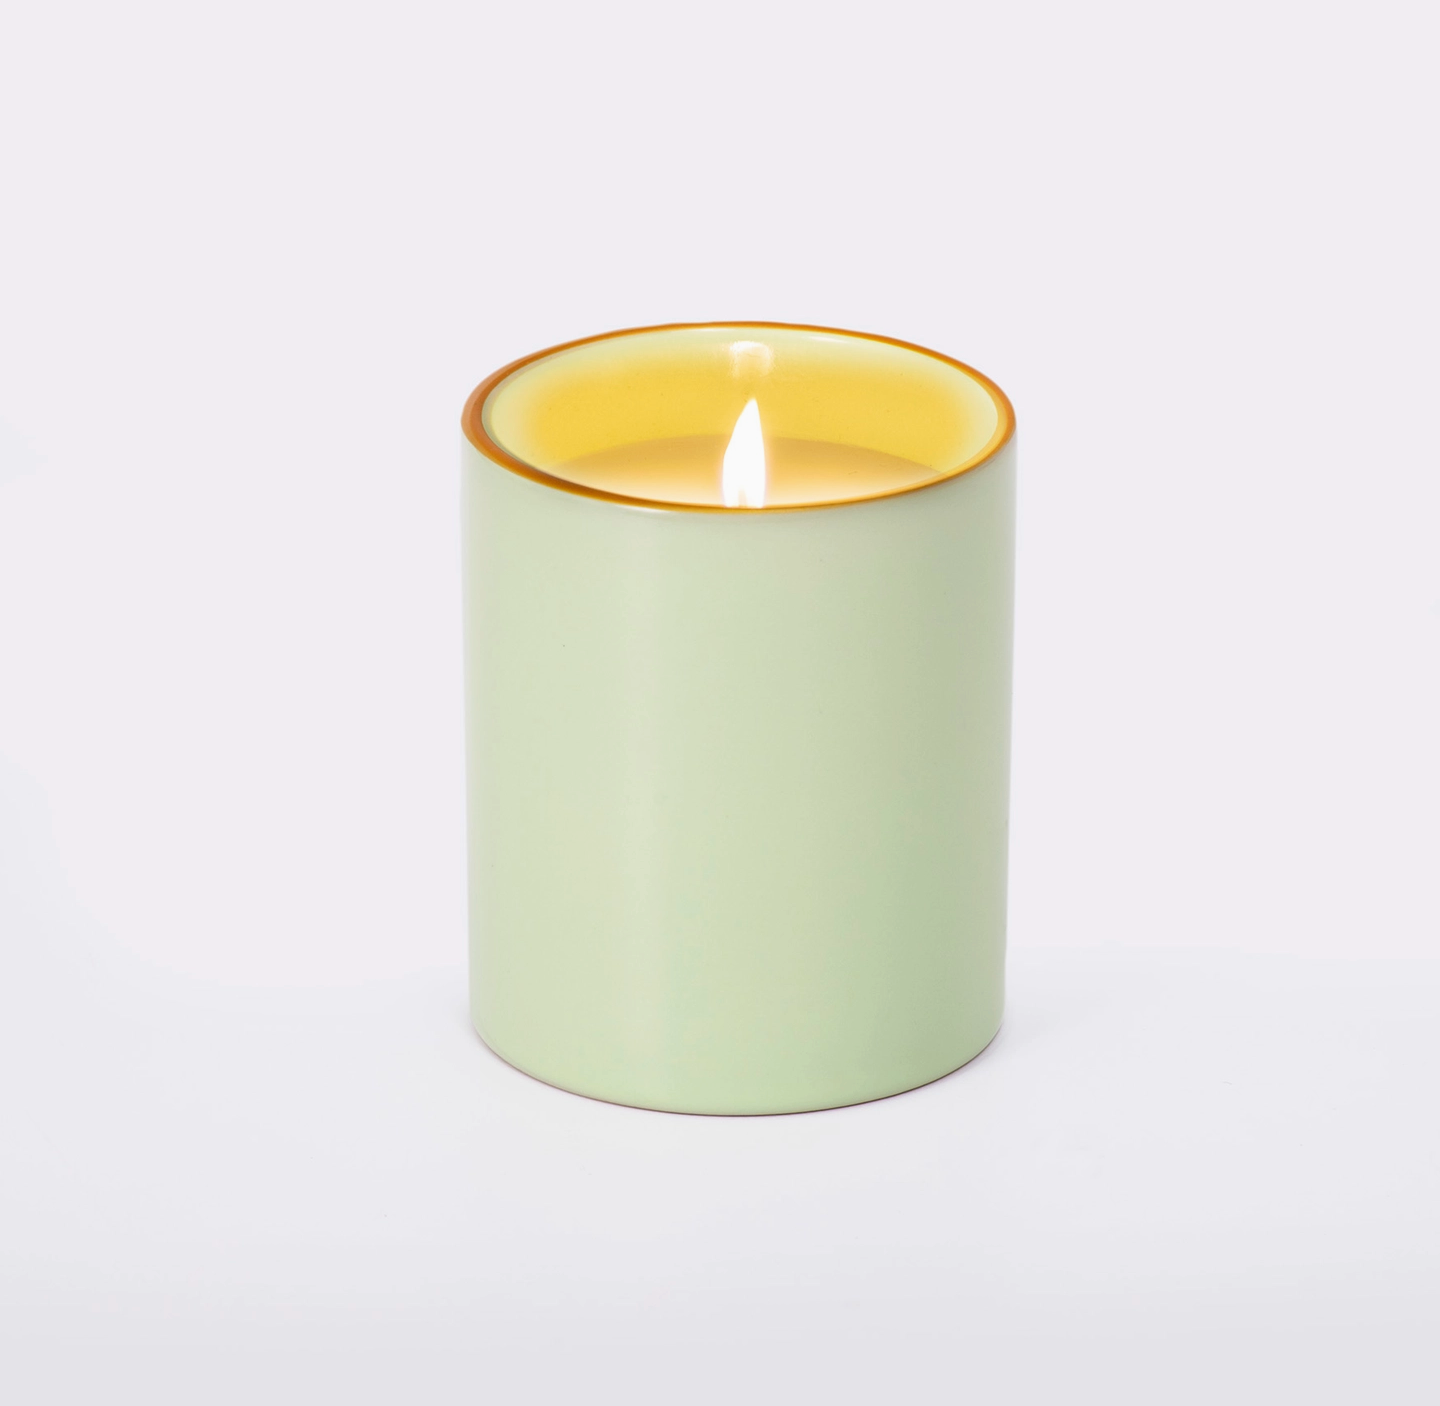 La Vive Medium Candle - Asian Pear, Lychee and Cassis